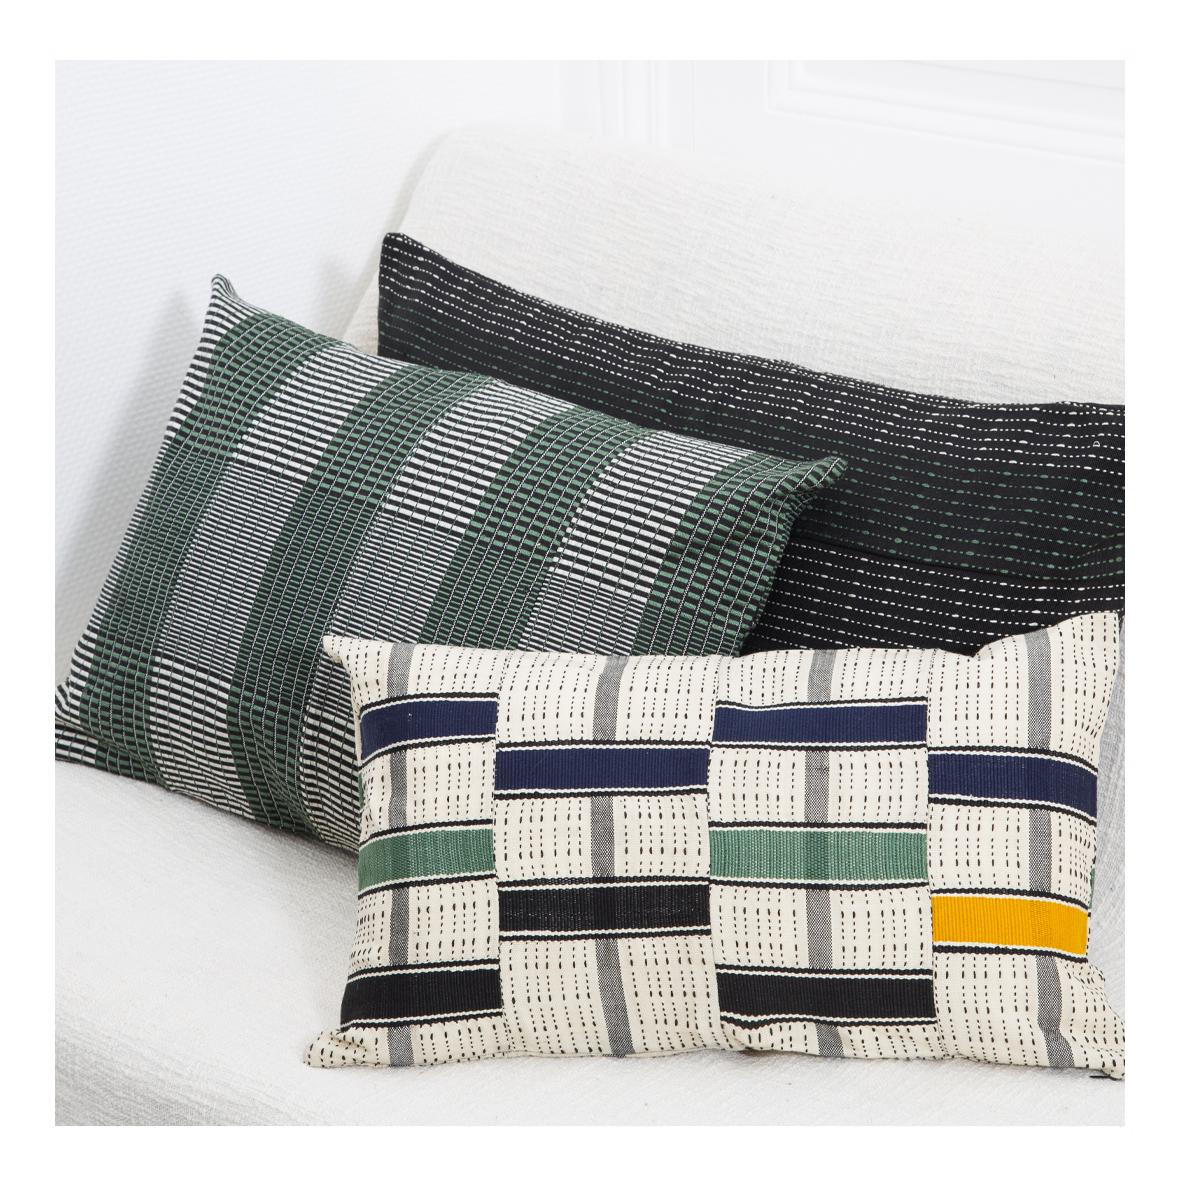 Woven Kente cushion 1-Step: 
Warm and delicate
Colours: Herb

Are you looking for hand crafted textur? This subtly graphic hand-woven cushion in Green, Black and Off-White has delicately striped pattern, that is contemporary. This XL cotton